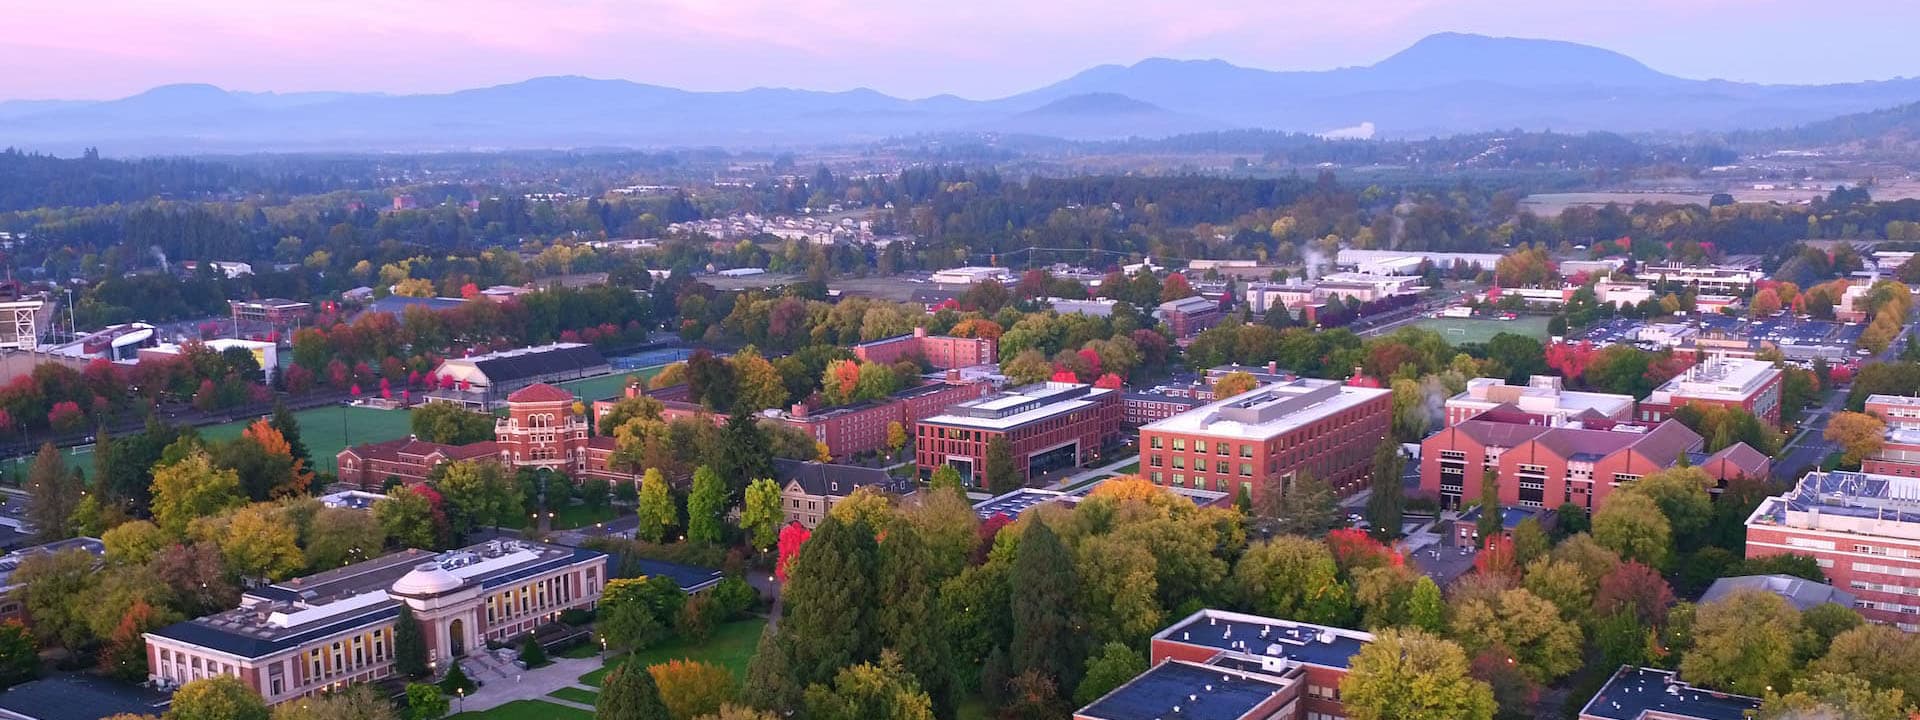 Oregon State University campus from the air